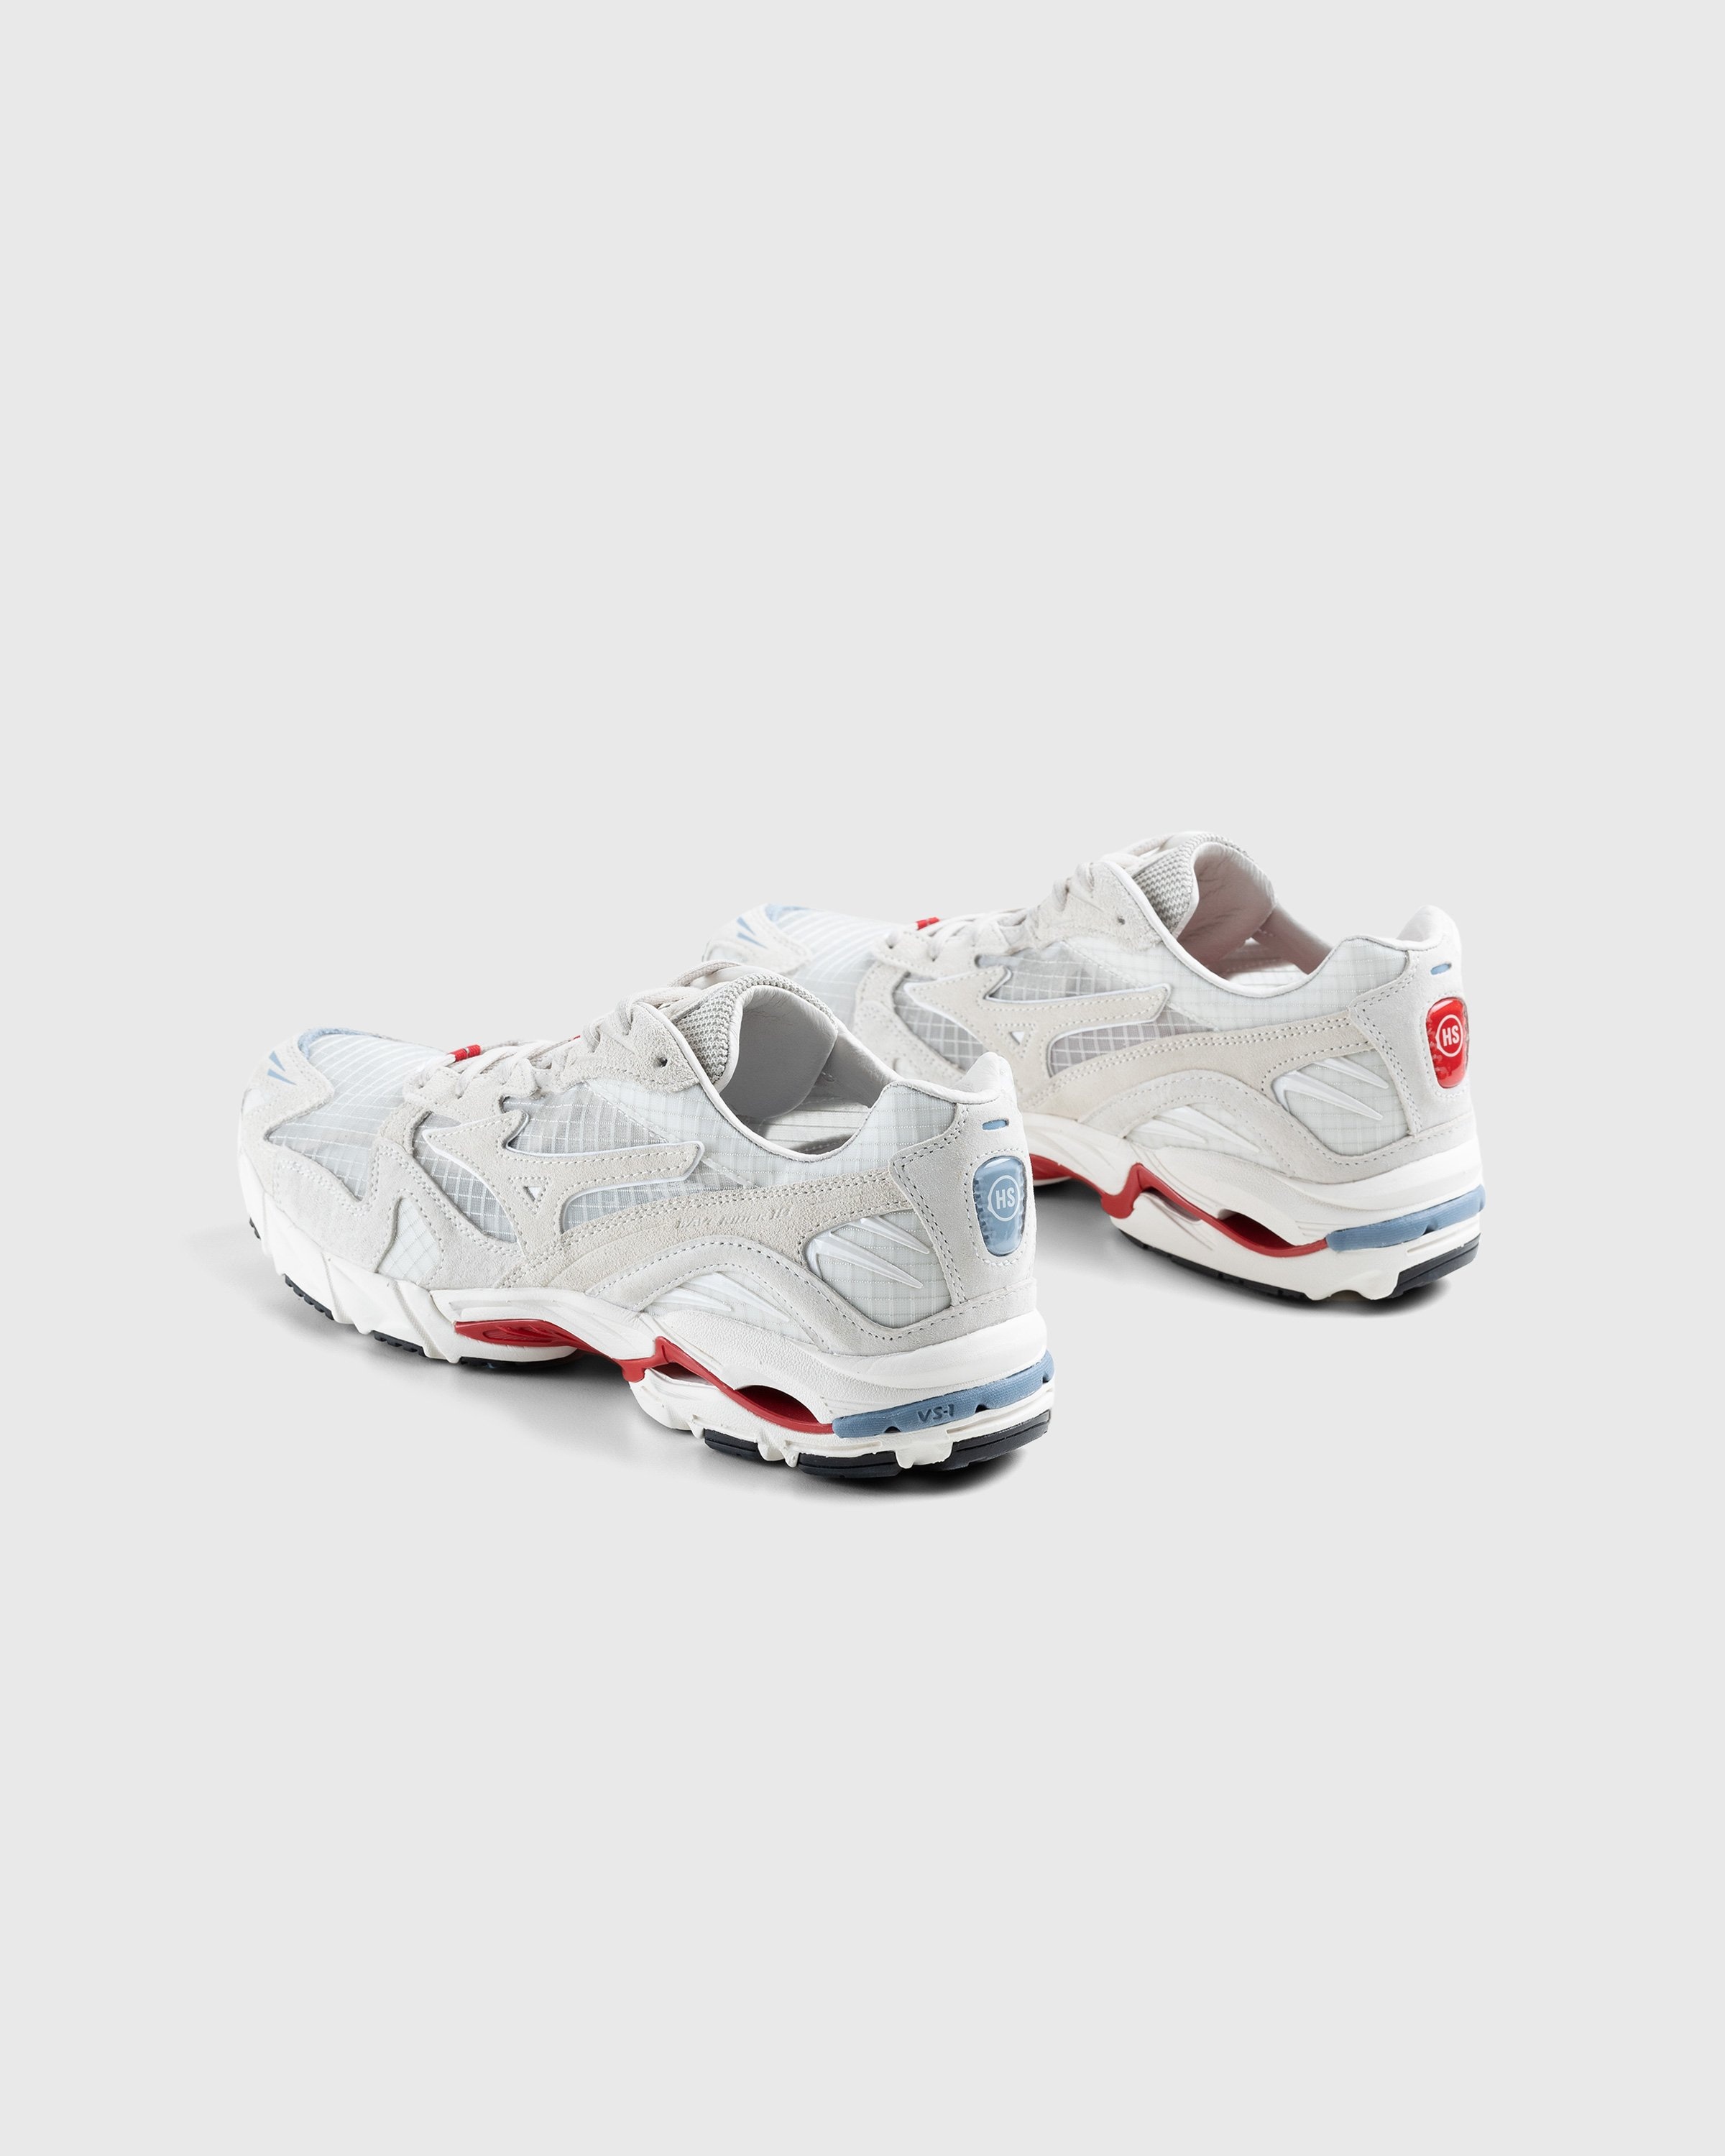 Mizuno x Highsnobiety – Wave Rider 10 White/Red - Low Top Sneakers - Grey - Image 4